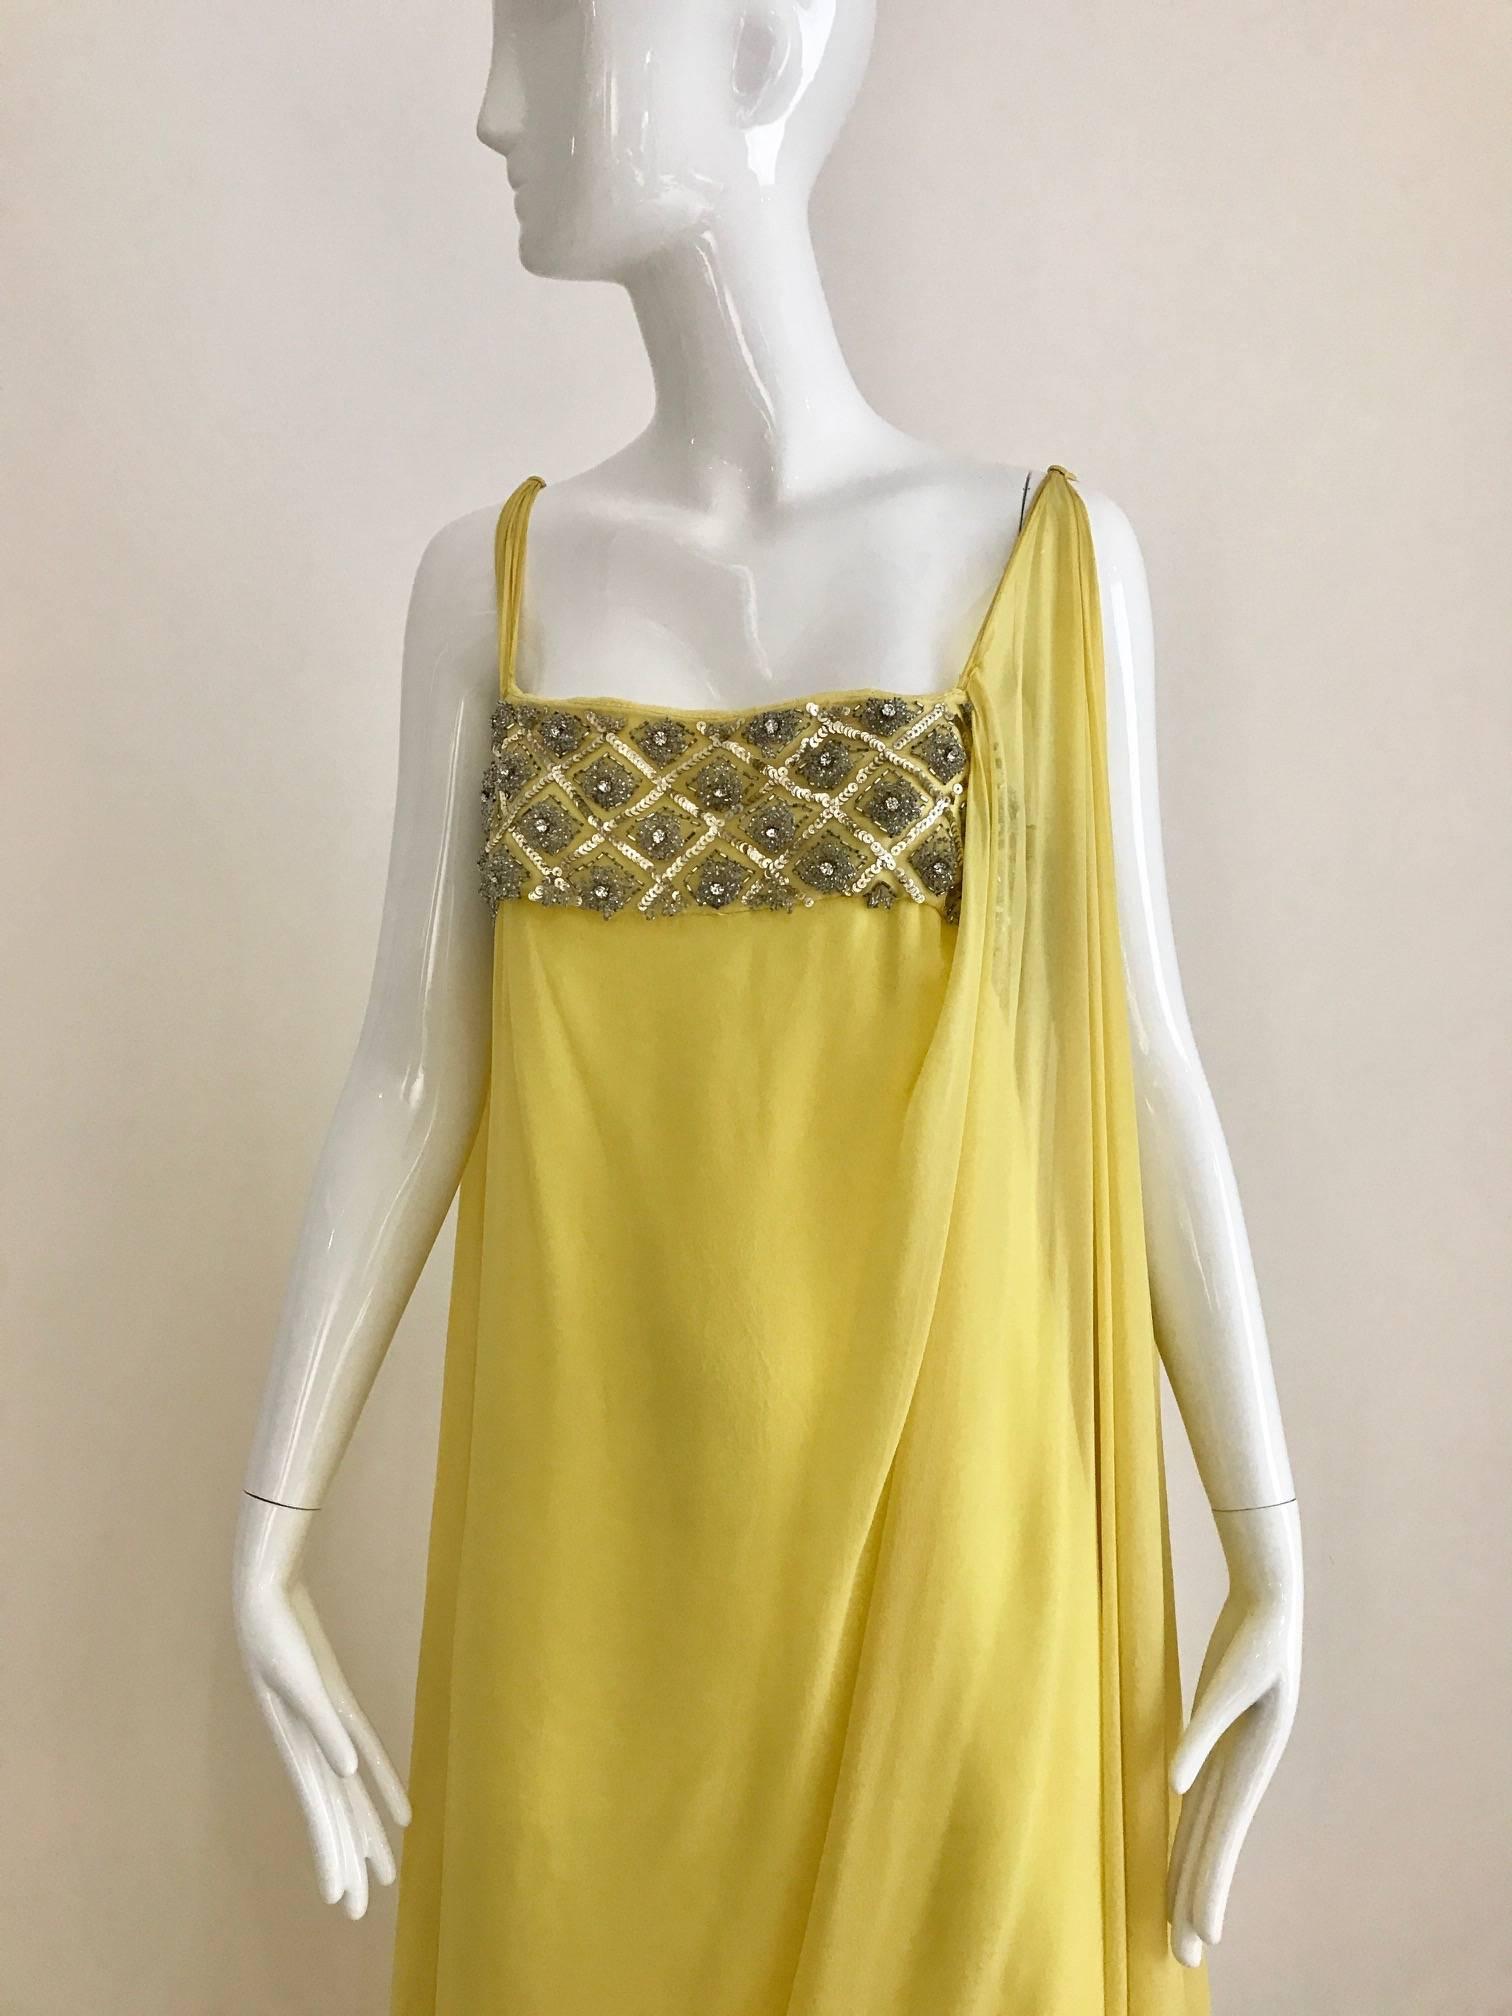 This vintage 1960s yellow silk chiffon Grecian sleeveless gown is the epitome of Grace Kelley elegance. The bodice is highlighted with rhinestones and silver sequins, while the the right shoulder has a long train attached at the top of the shoulder